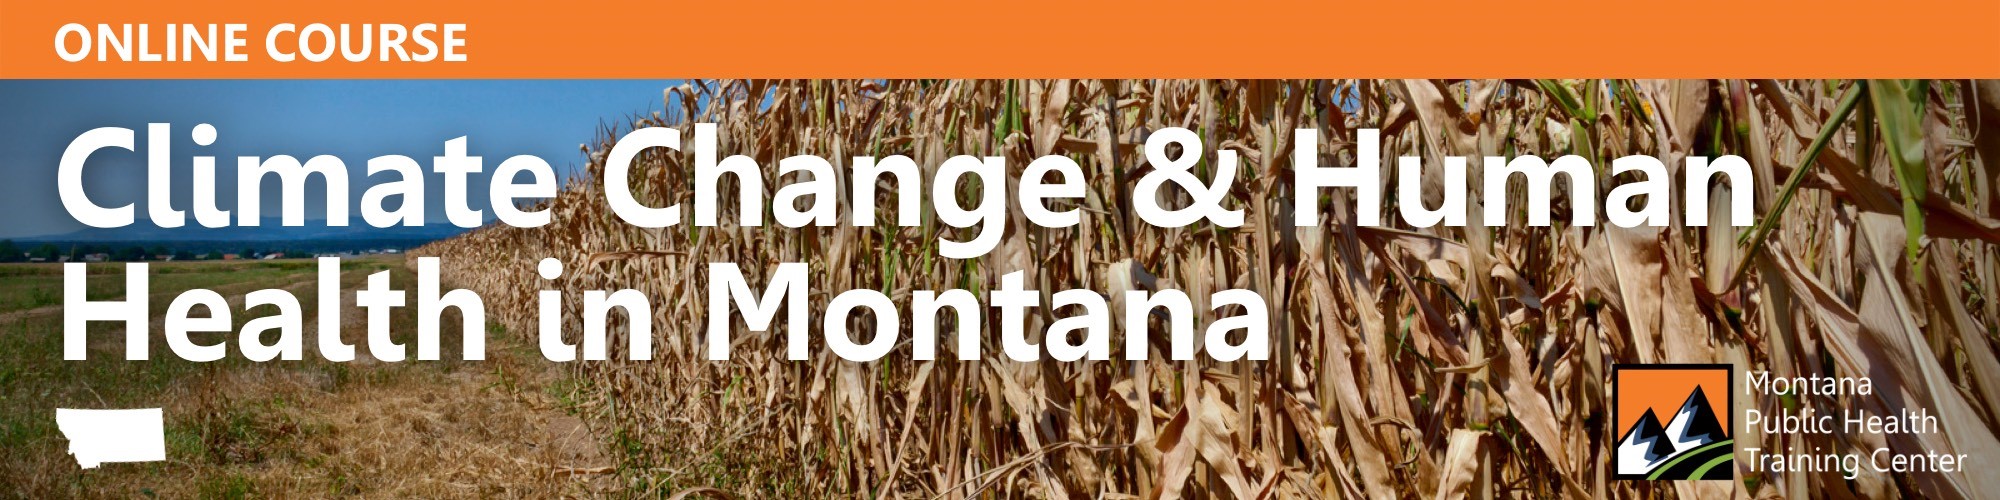 Decorative image with the title climate change and human health in montana